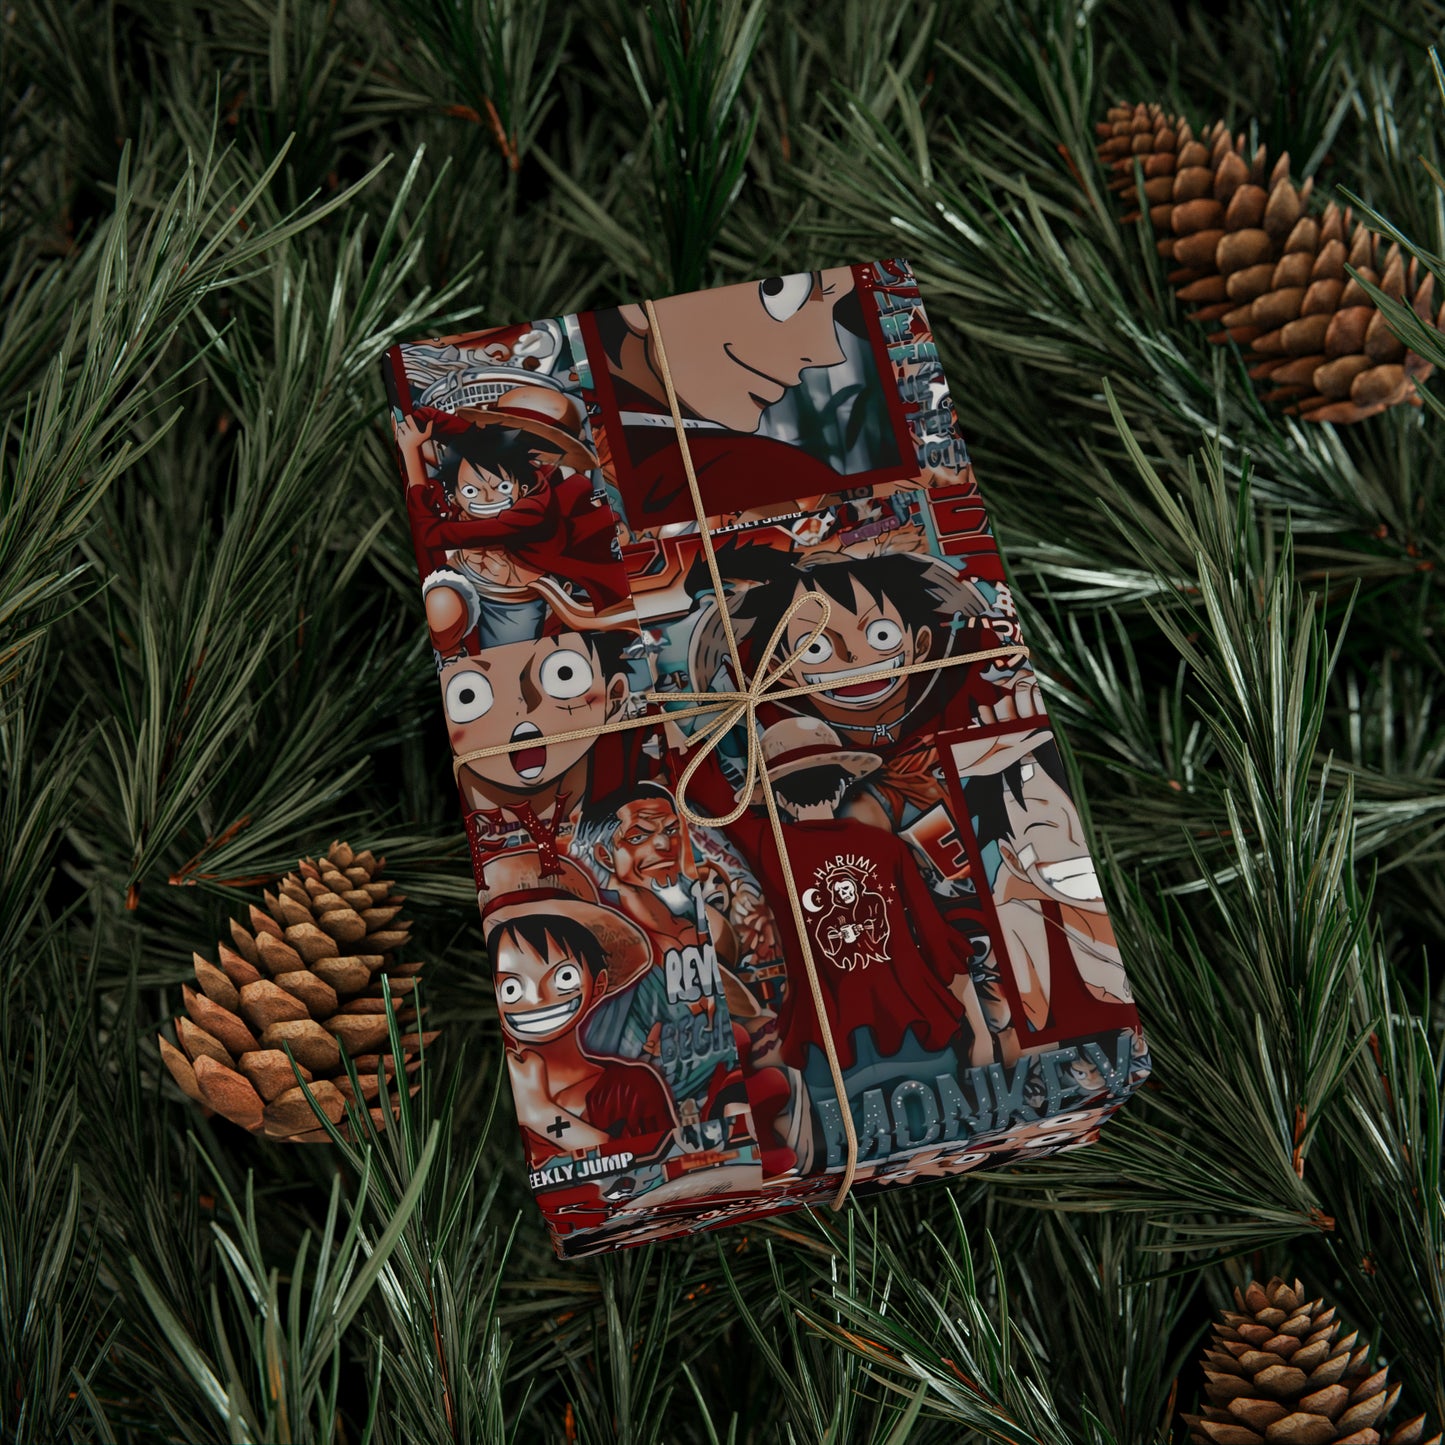 One Piece Anime Monkey D Luffy Red Collage Gift Wrapping Paper